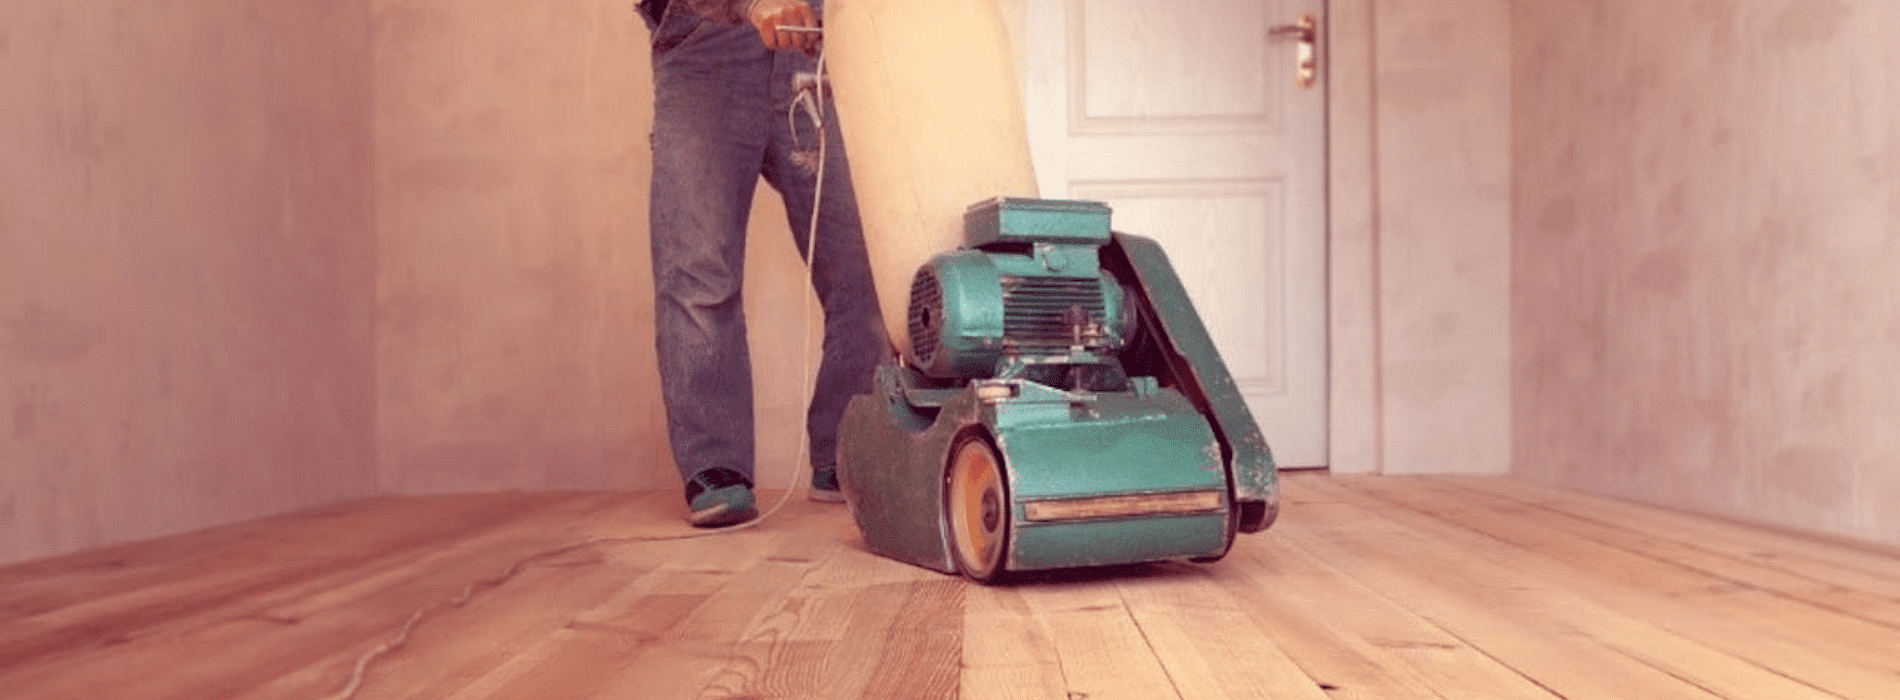 Mr Sander® skillfully sanding a herringbone floor using the powerful 2.2 kW Bona belt sander. The 220V, 60Hz machine, sized 250x750 mm, ensures exceptional results. The dust extraction system with HEPA filter guarantees cleanliness and efficiency for a flawless finish.